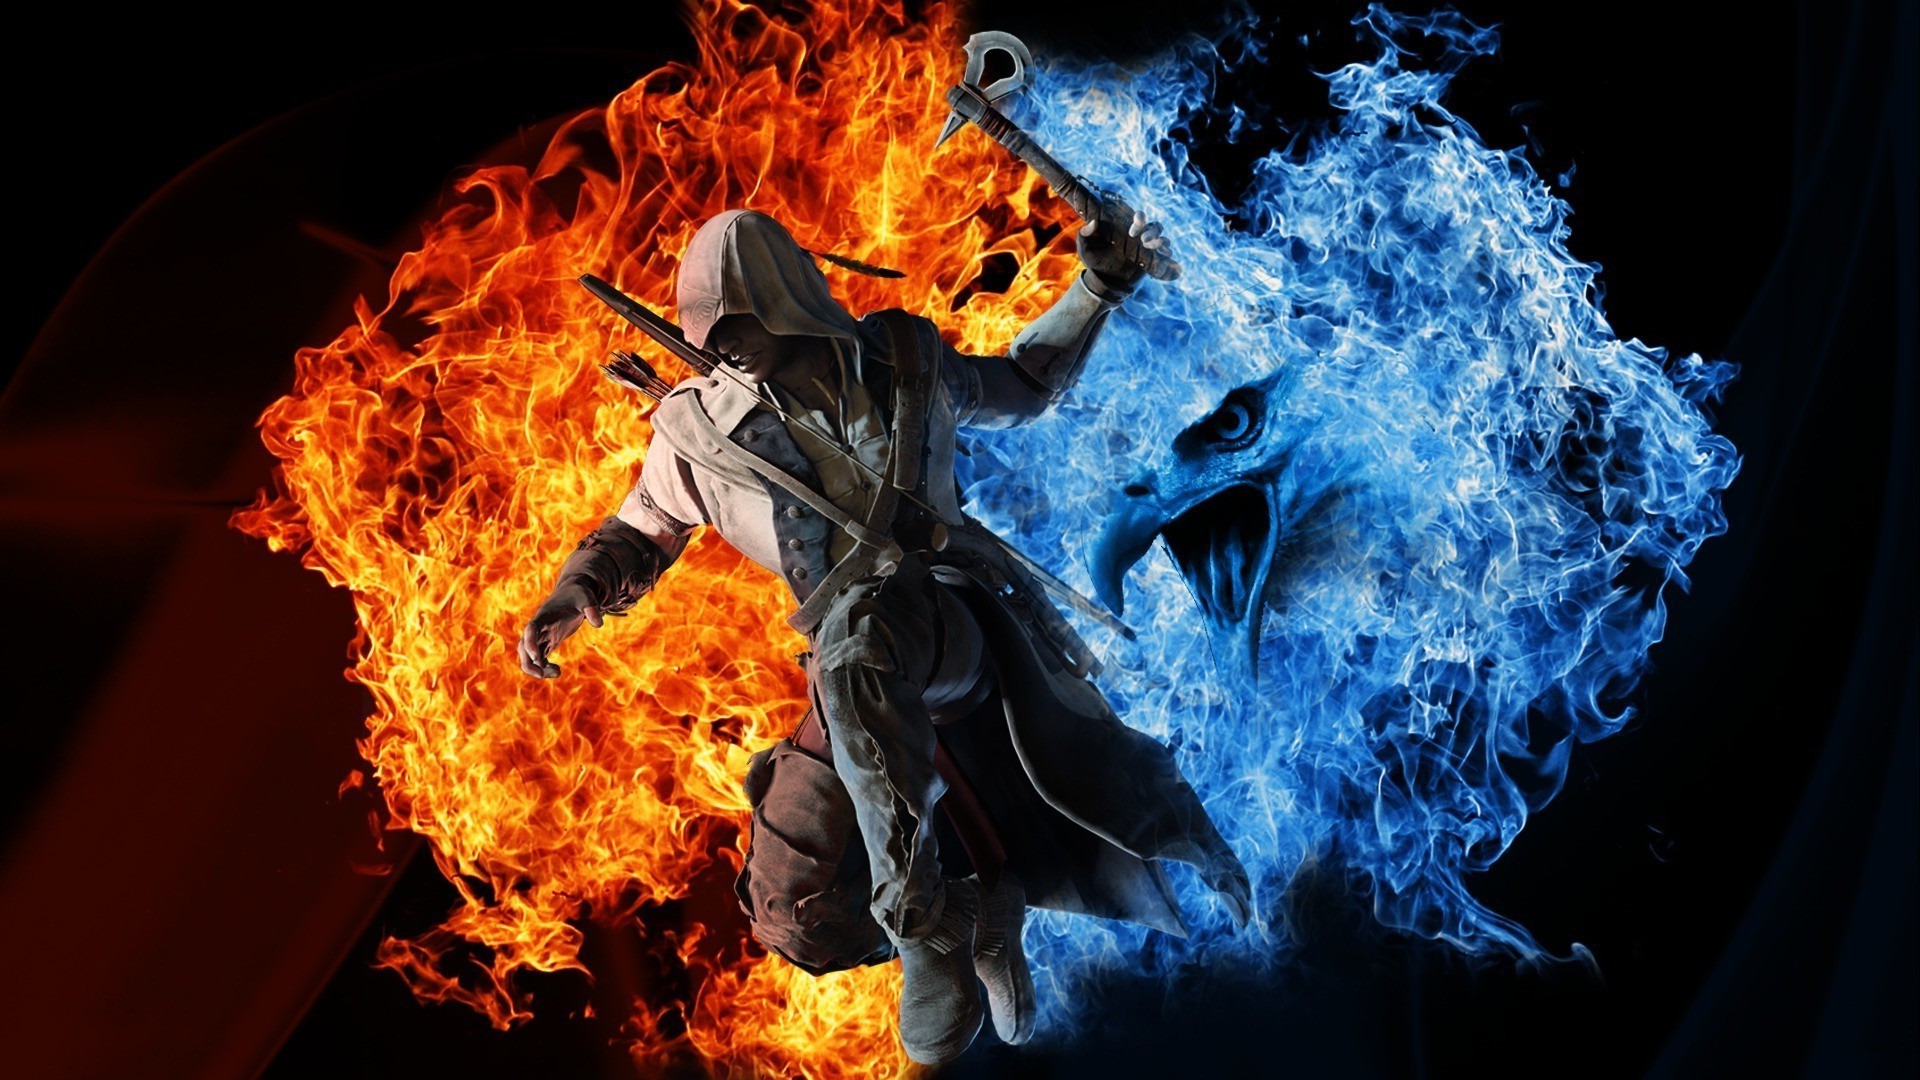 A warrior against the background of fire and water wallpaper